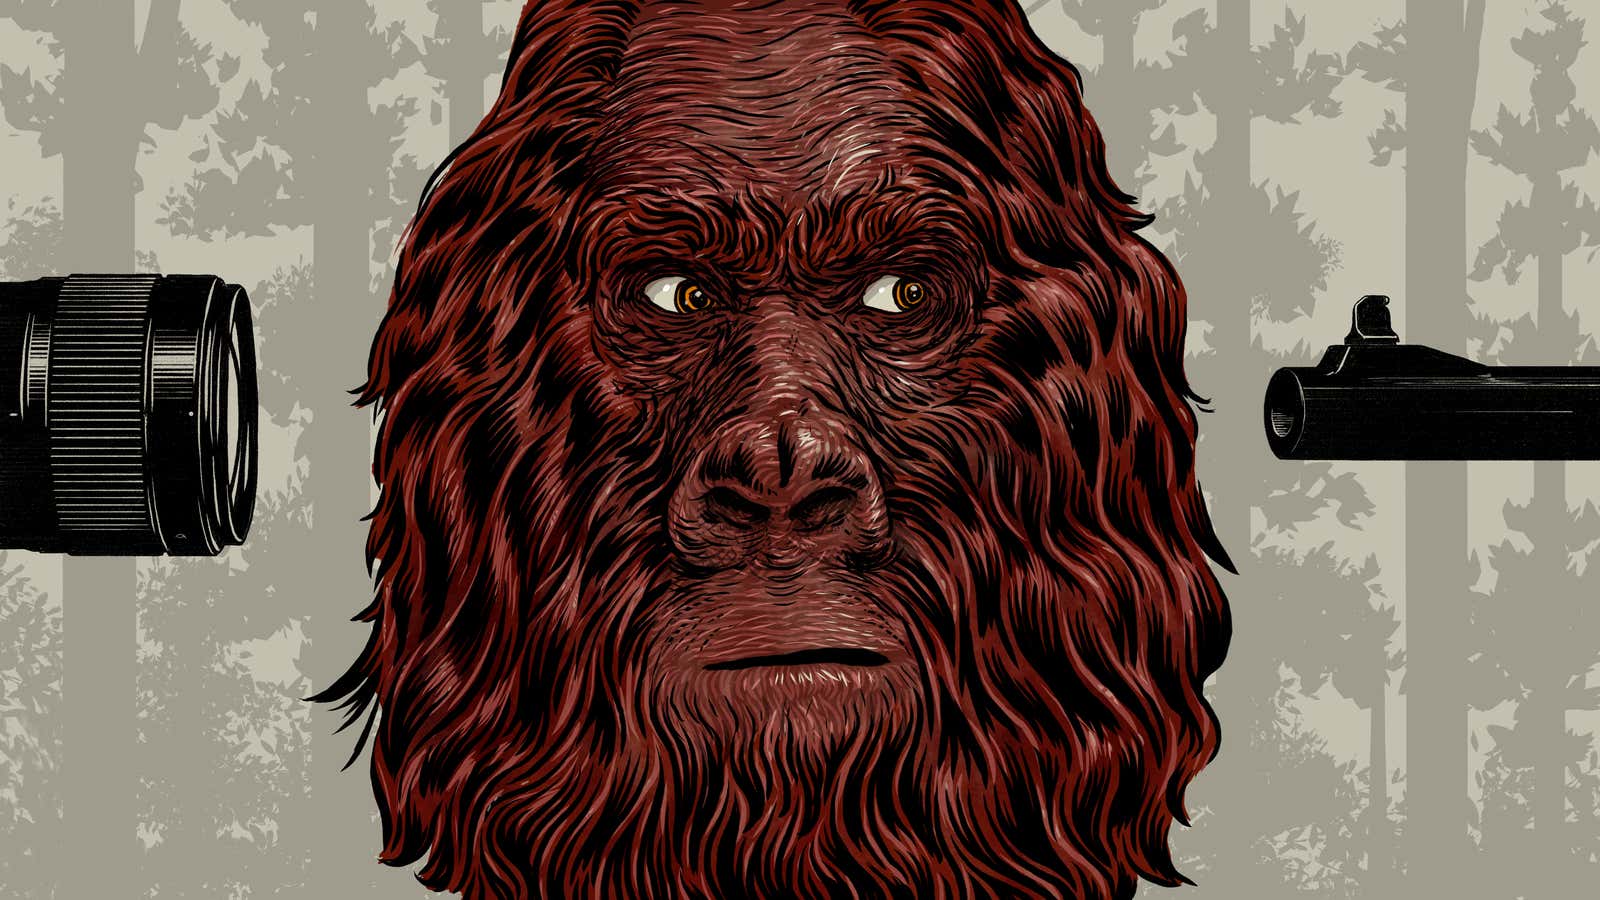 To Kill or to Capture Bigfoot: The Great Cryptozoological Debate